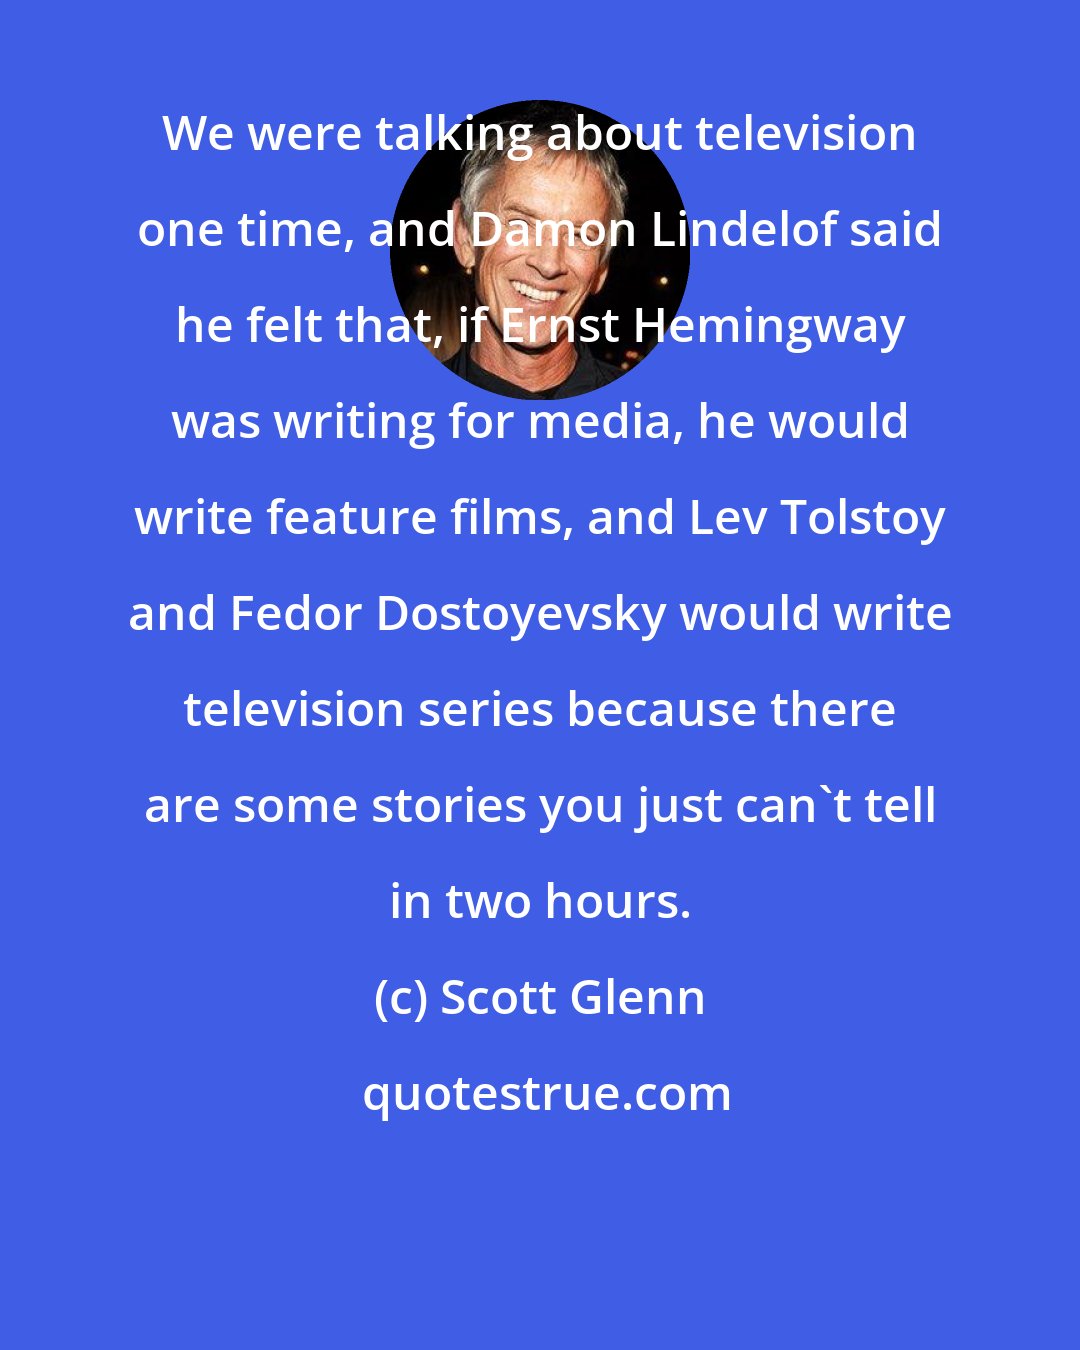 Scott Glenn: We were talking about television one time, and Damon Lindelof said he felt that, if Ernst Hemingway was writing for media, he would write feature films, and Lev Tolstoy and Fedor Dostoyevsky would write television series because there are some stories you just can't tell in two hours.